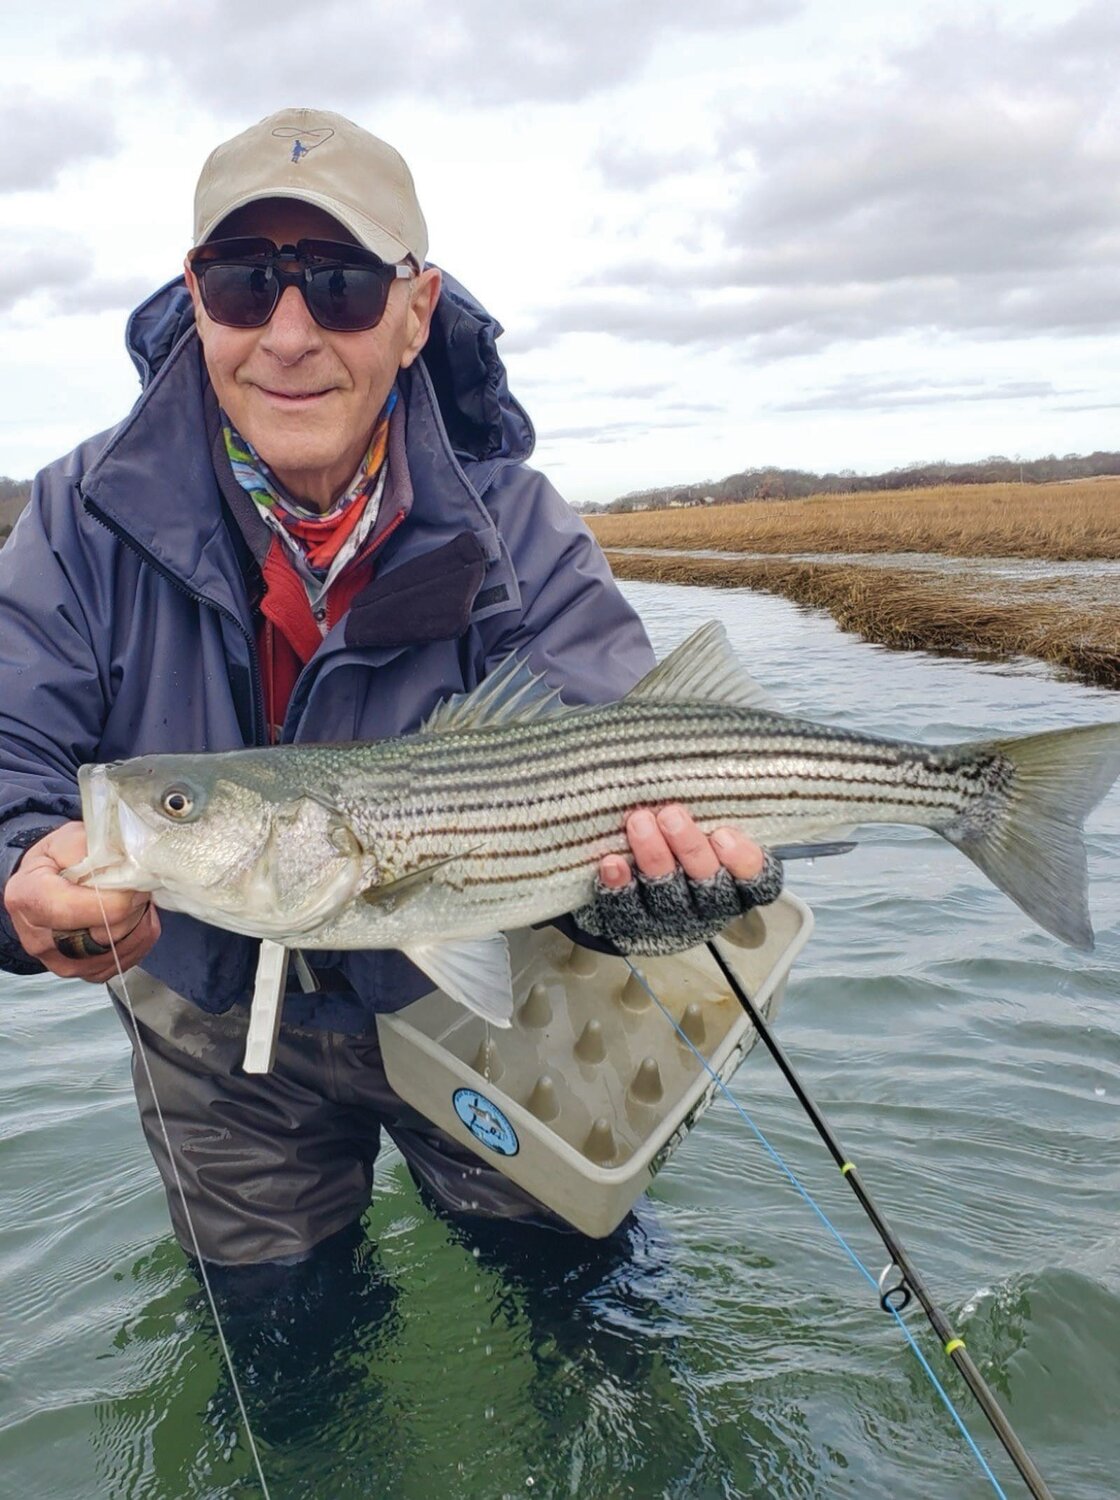 FLY FISHING: Ed Lombardo with a striped bass caught fly fishing on Narrow River Sunday. Ed said, “The water was crystal clear.”